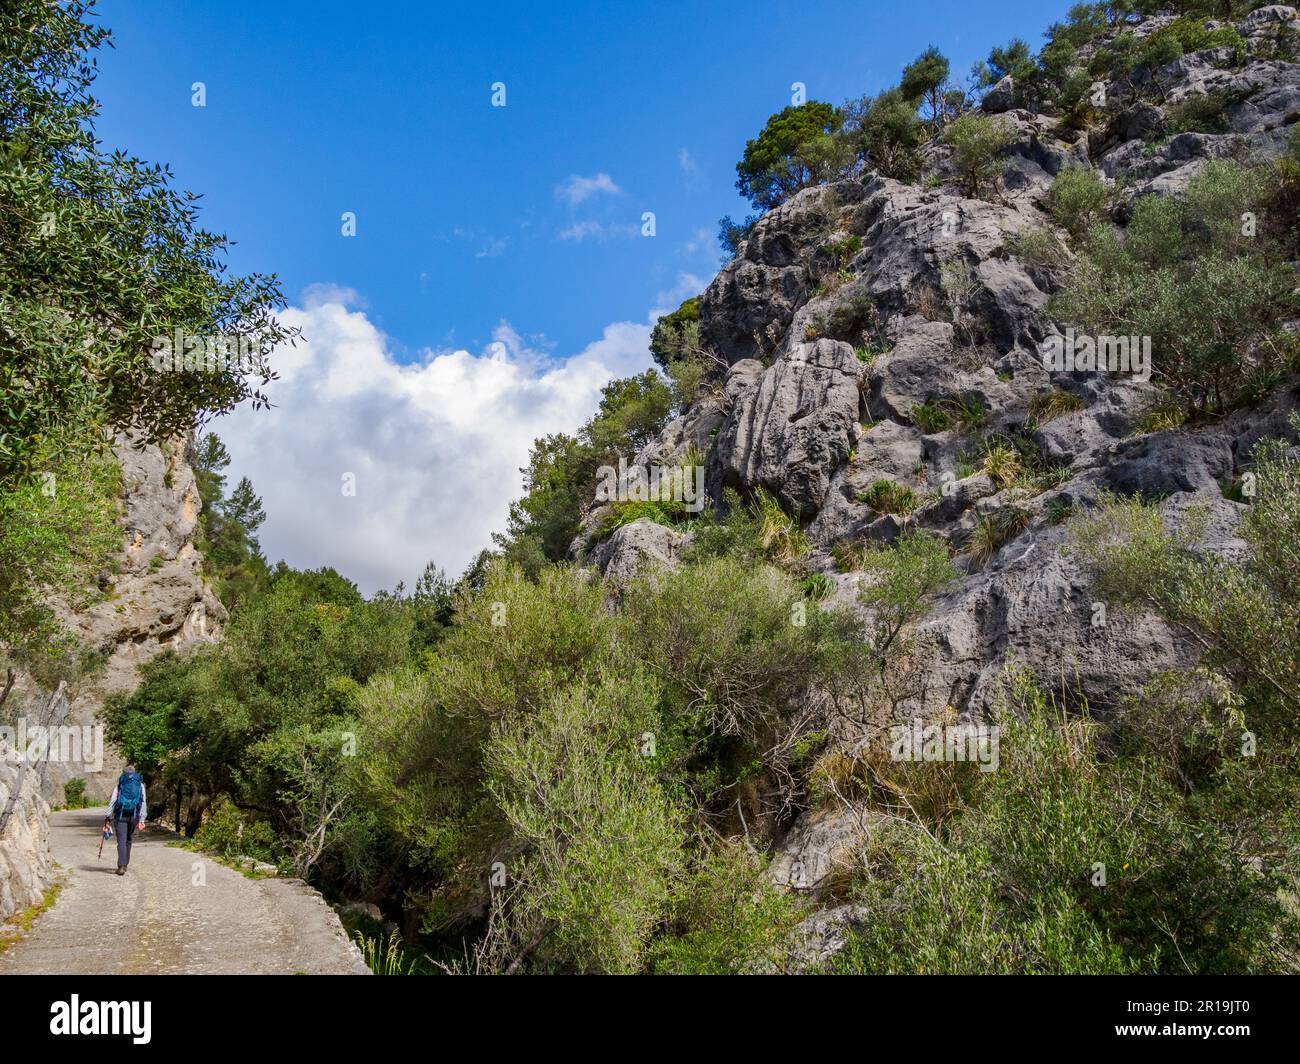 Walker on a track leading up through the rocky Pas de s'Escaleta from Alaro to Orient in the Tramuntana Mountains of northern Majorca Spain Stock Photo